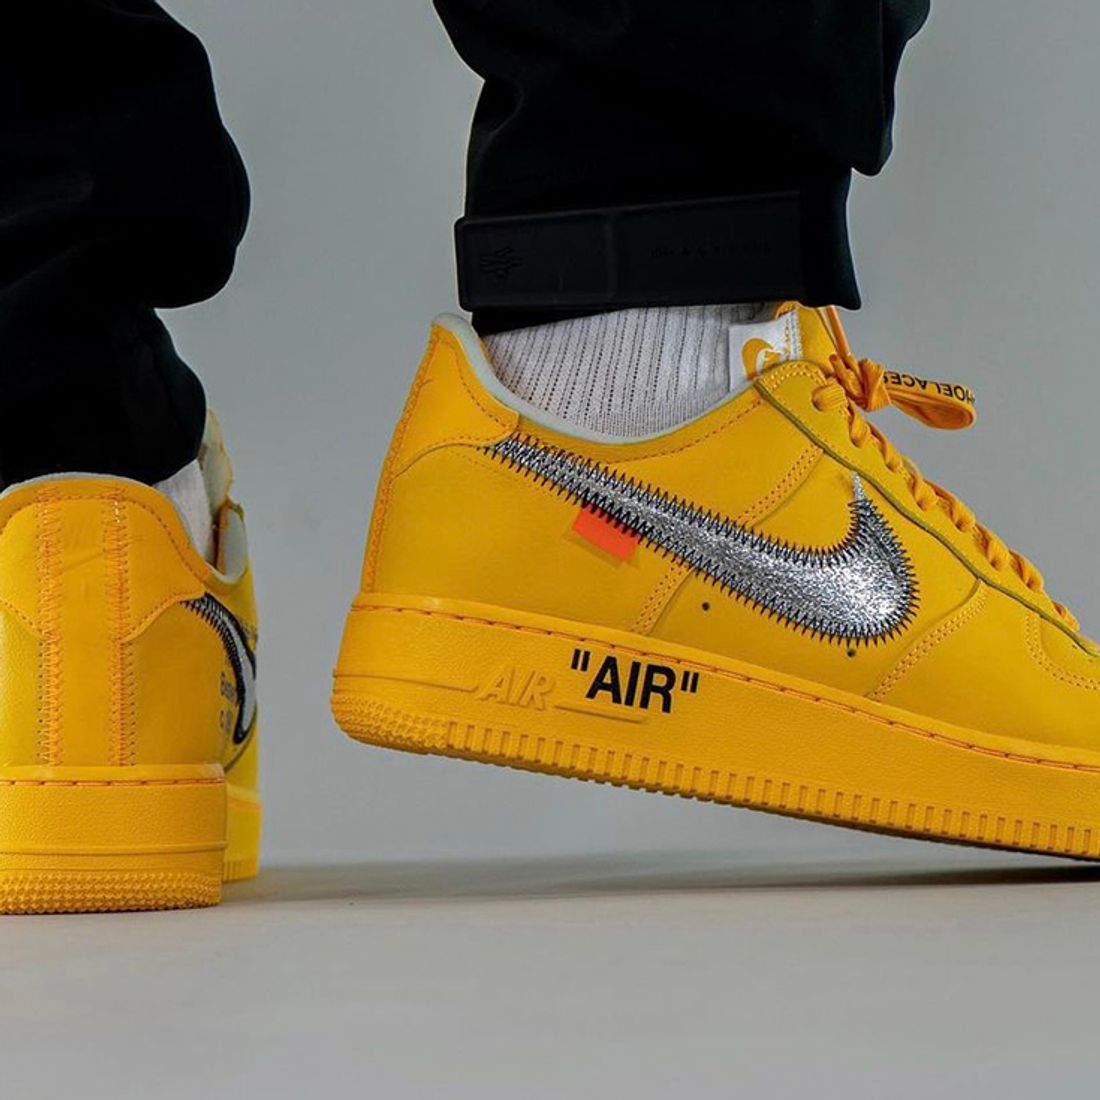 OFF-WHITE AIR FORCE 1 UNIVERSITY GOLD 🍋 REVIEW + ON FEET! 